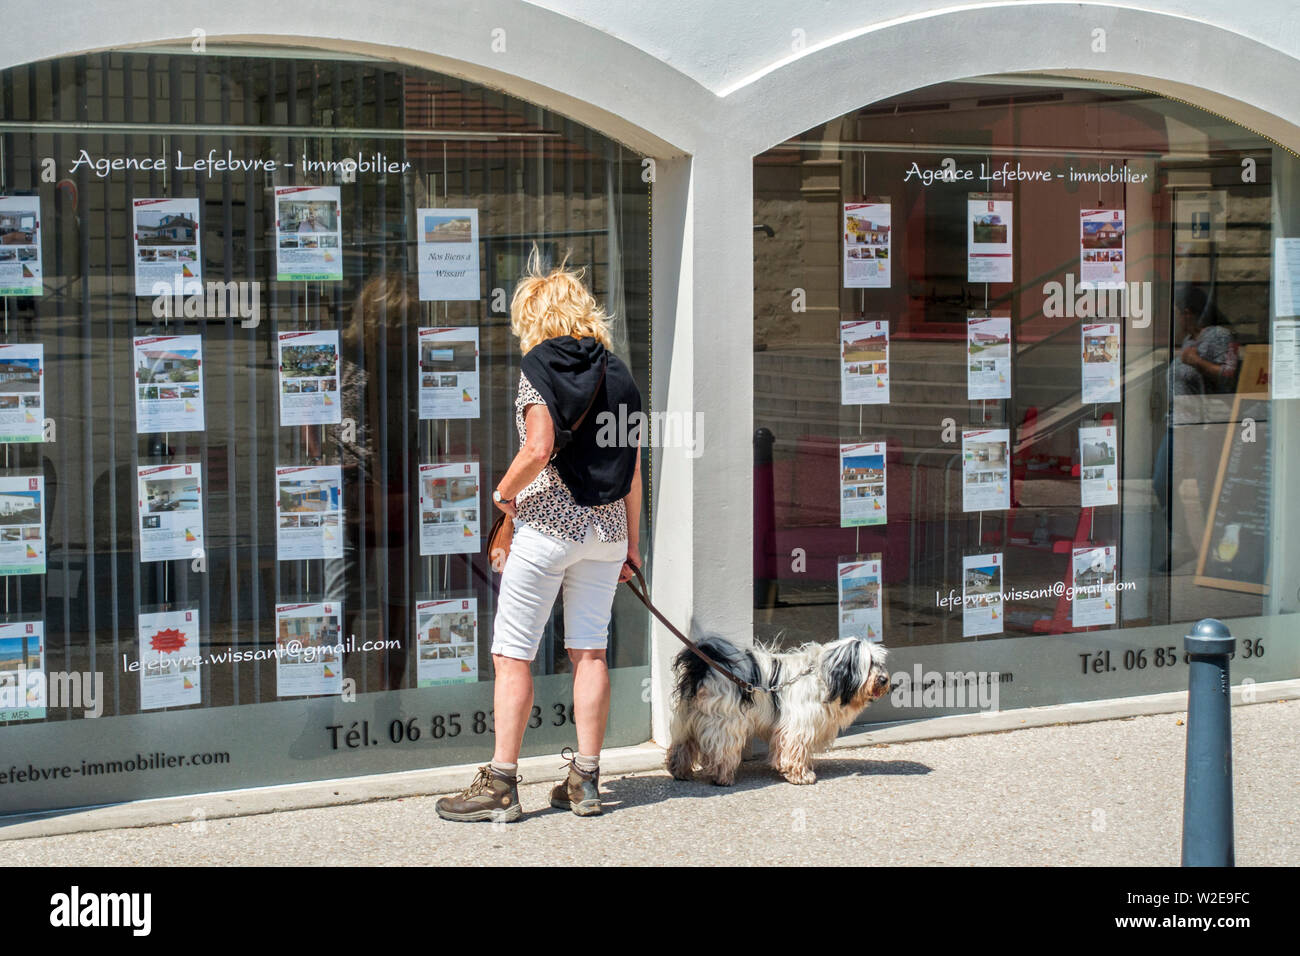 Woman with dog looking at prices of flats and houses for sale in display window of real estate / property agency at French seaside resort, France Stock Photo